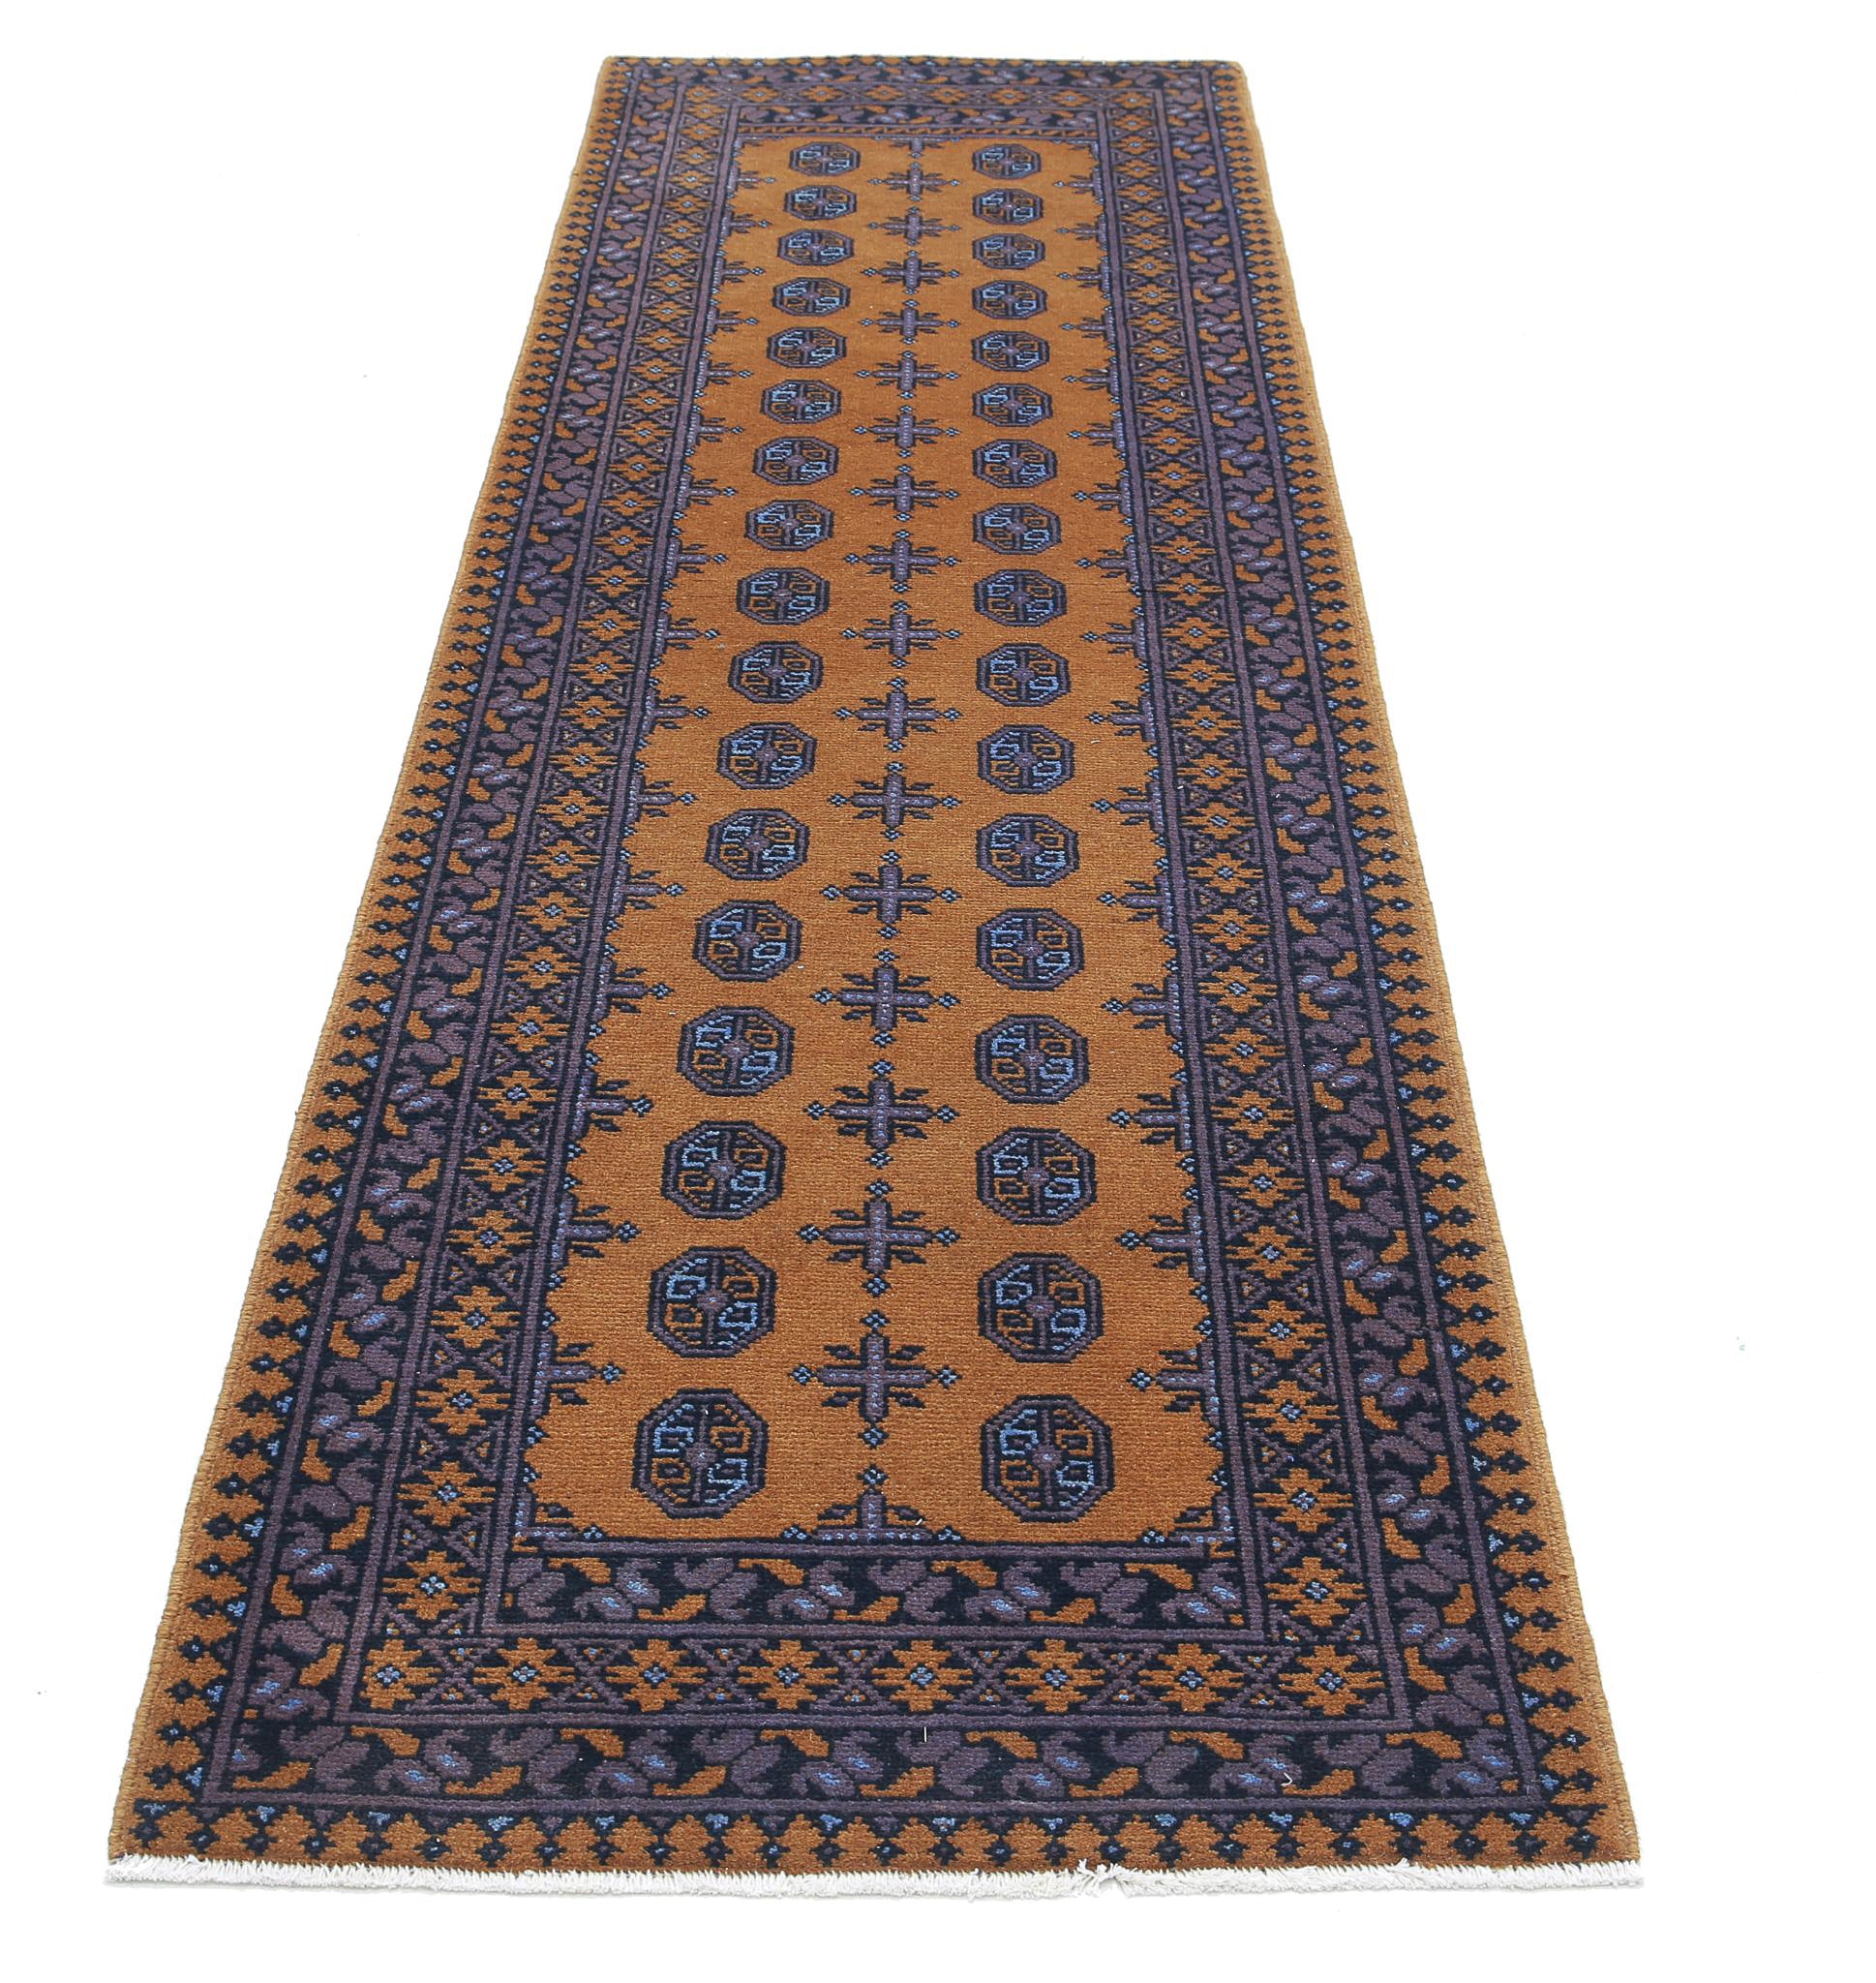 Revival-hand-knotted-gul-collection-wool-rug-5013993-3.jpg